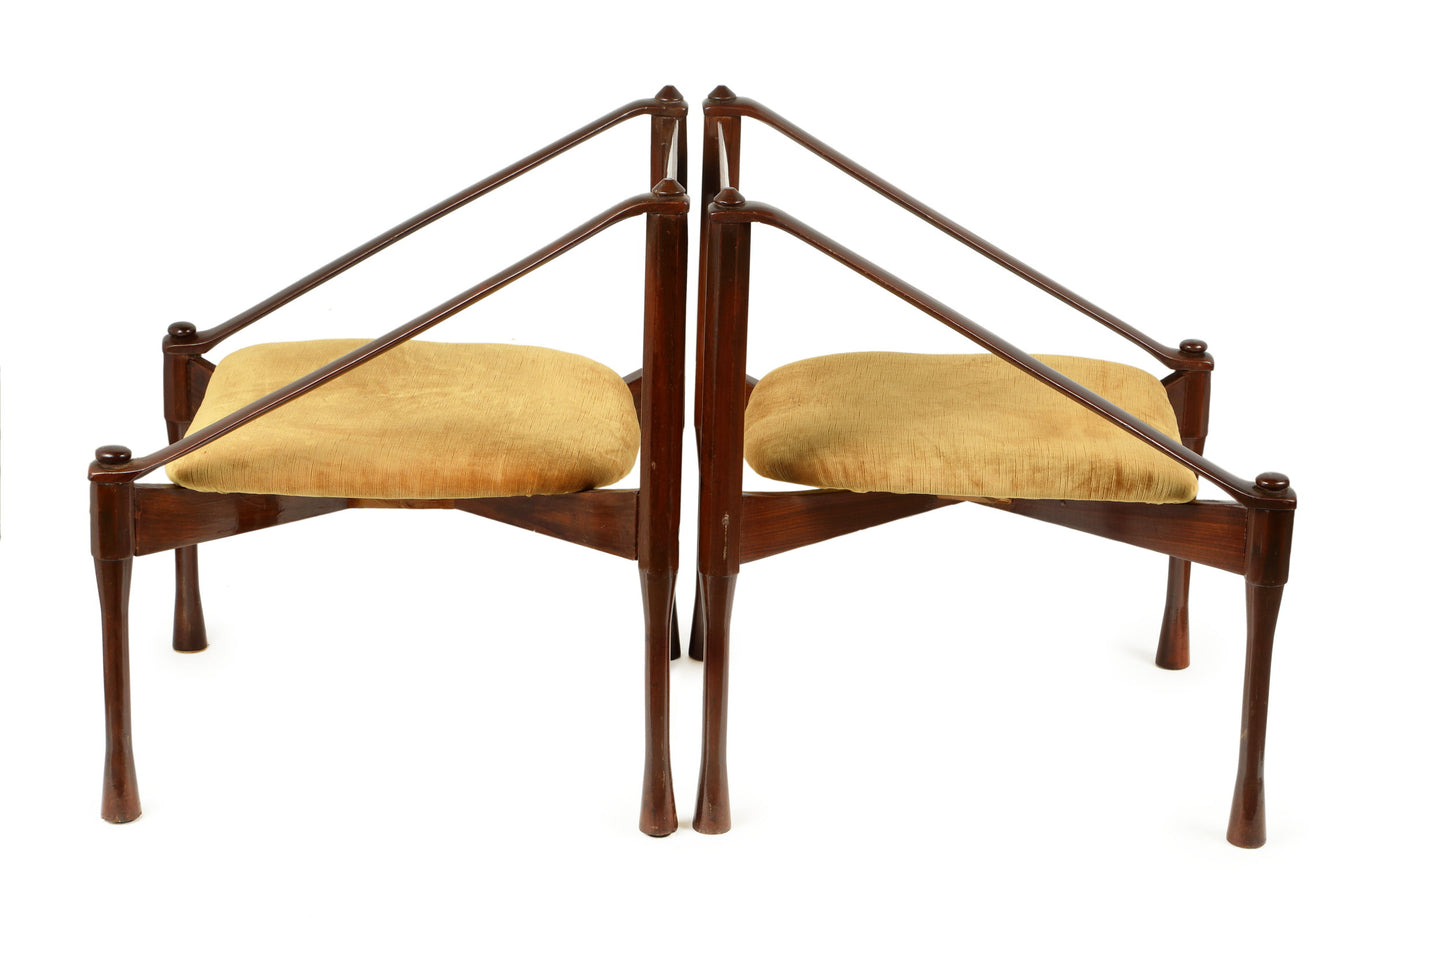 Pair of Giulio Moscatelli armchairs from the 1950s